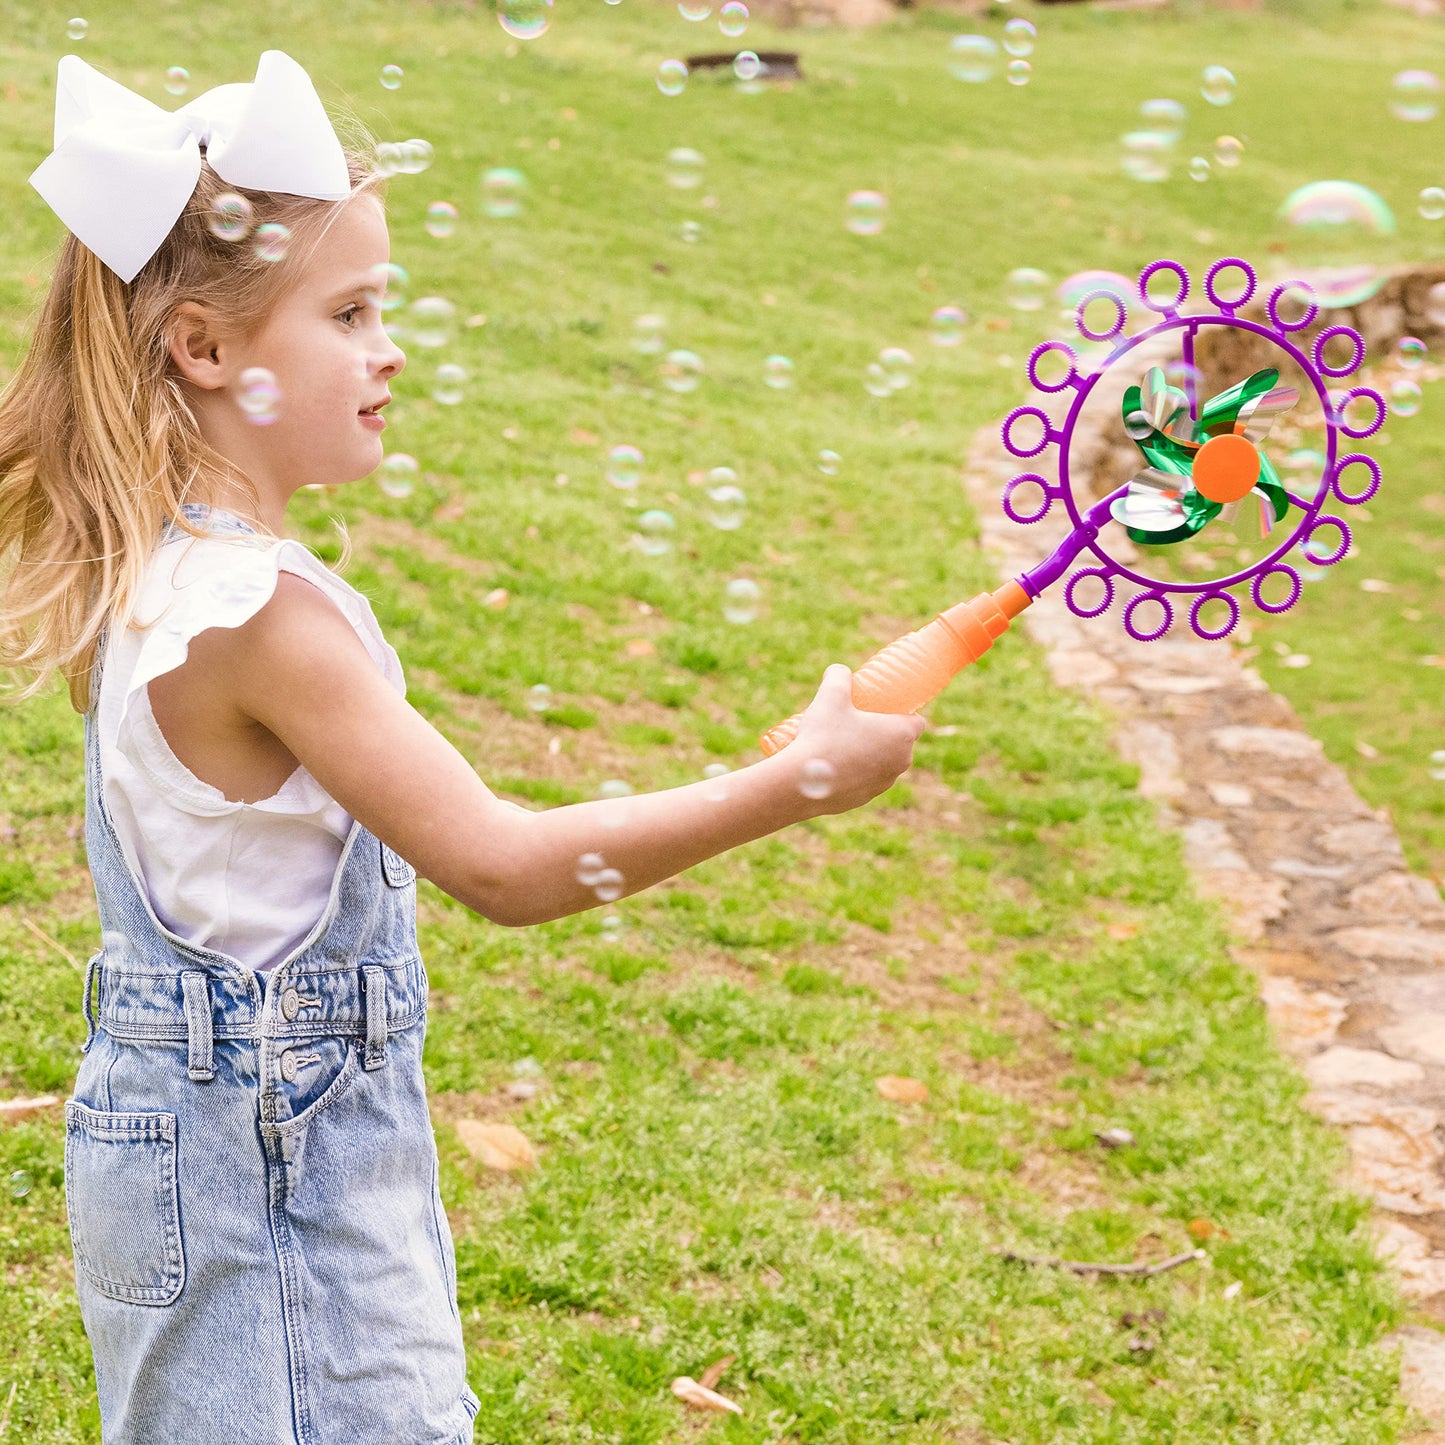 Sunny Days Entertainment Pinwheel Bubble Wand - Bubble Blower and Windmill Spinner - Colors and Styles May Vary